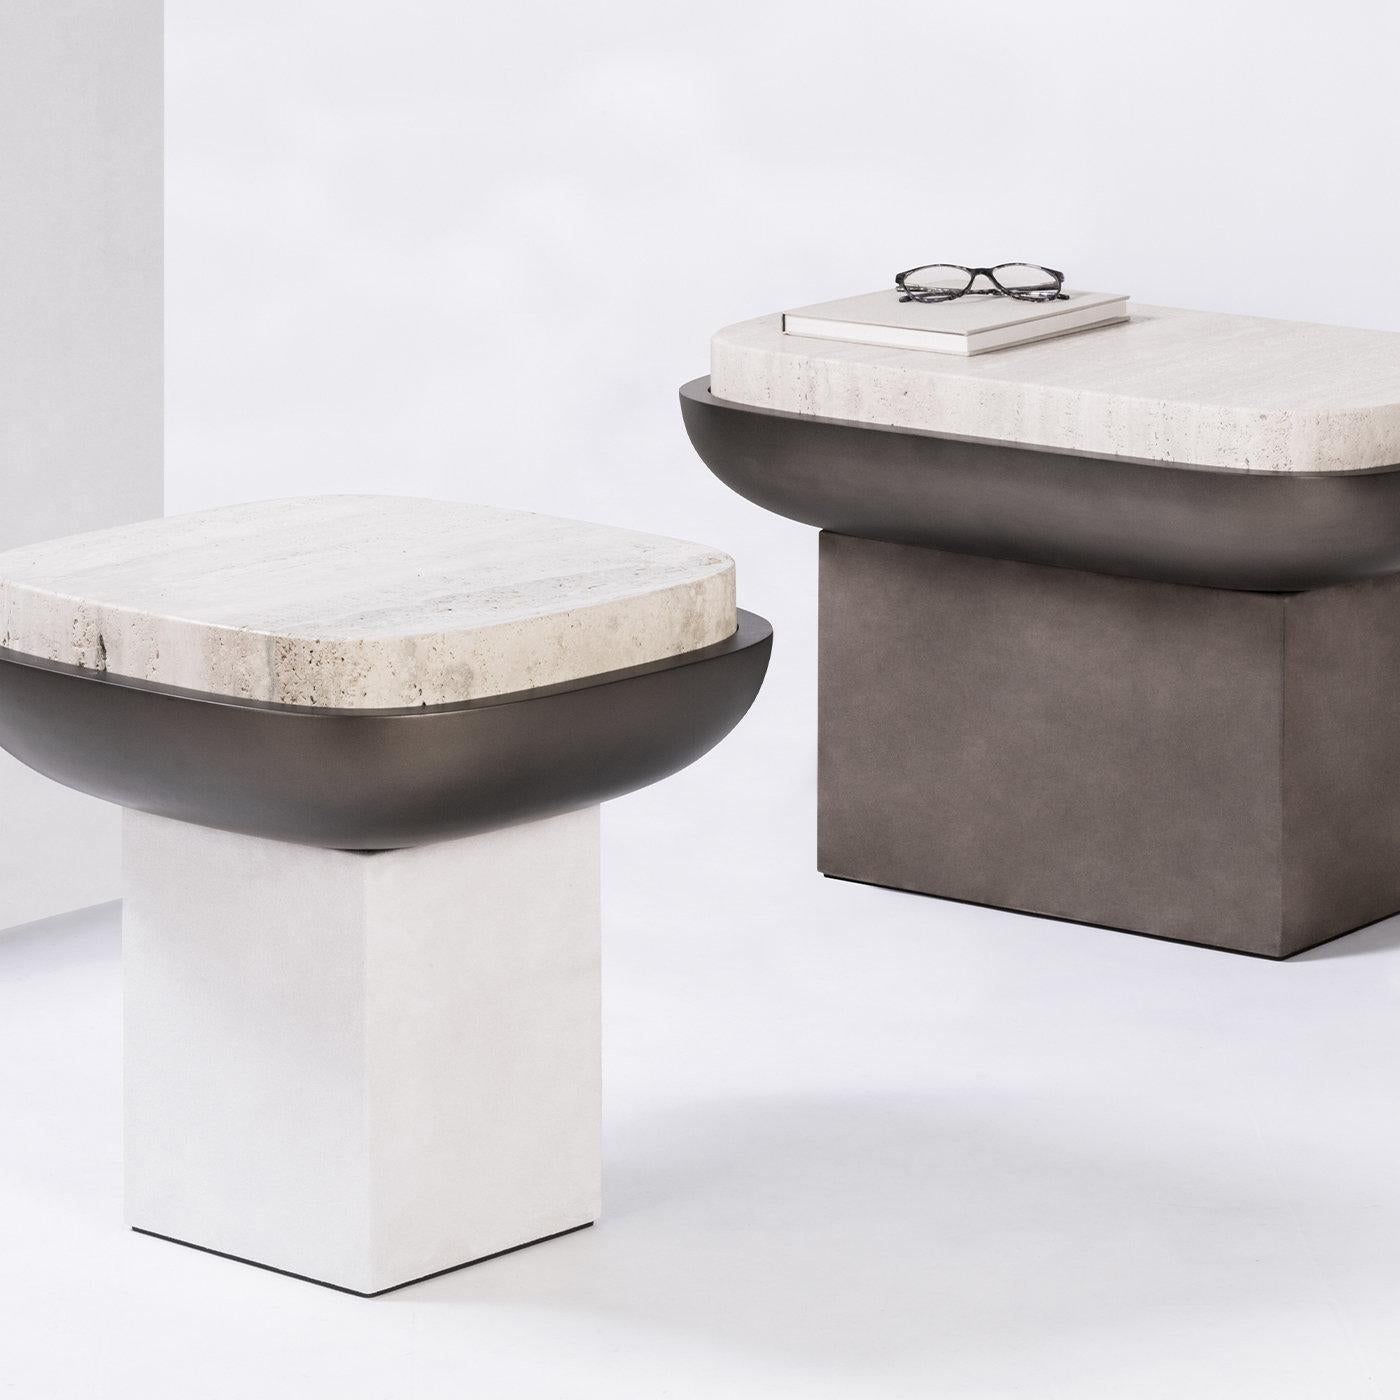 Contemporary square travertine & leather side table - Olympia by Stephane Parmentier for Giobagnara.
The object presented in the image has following finish: Travertine Top, A05 White Suede Leather (base) and Bronze-laquered Wood Seat Bowl.

This